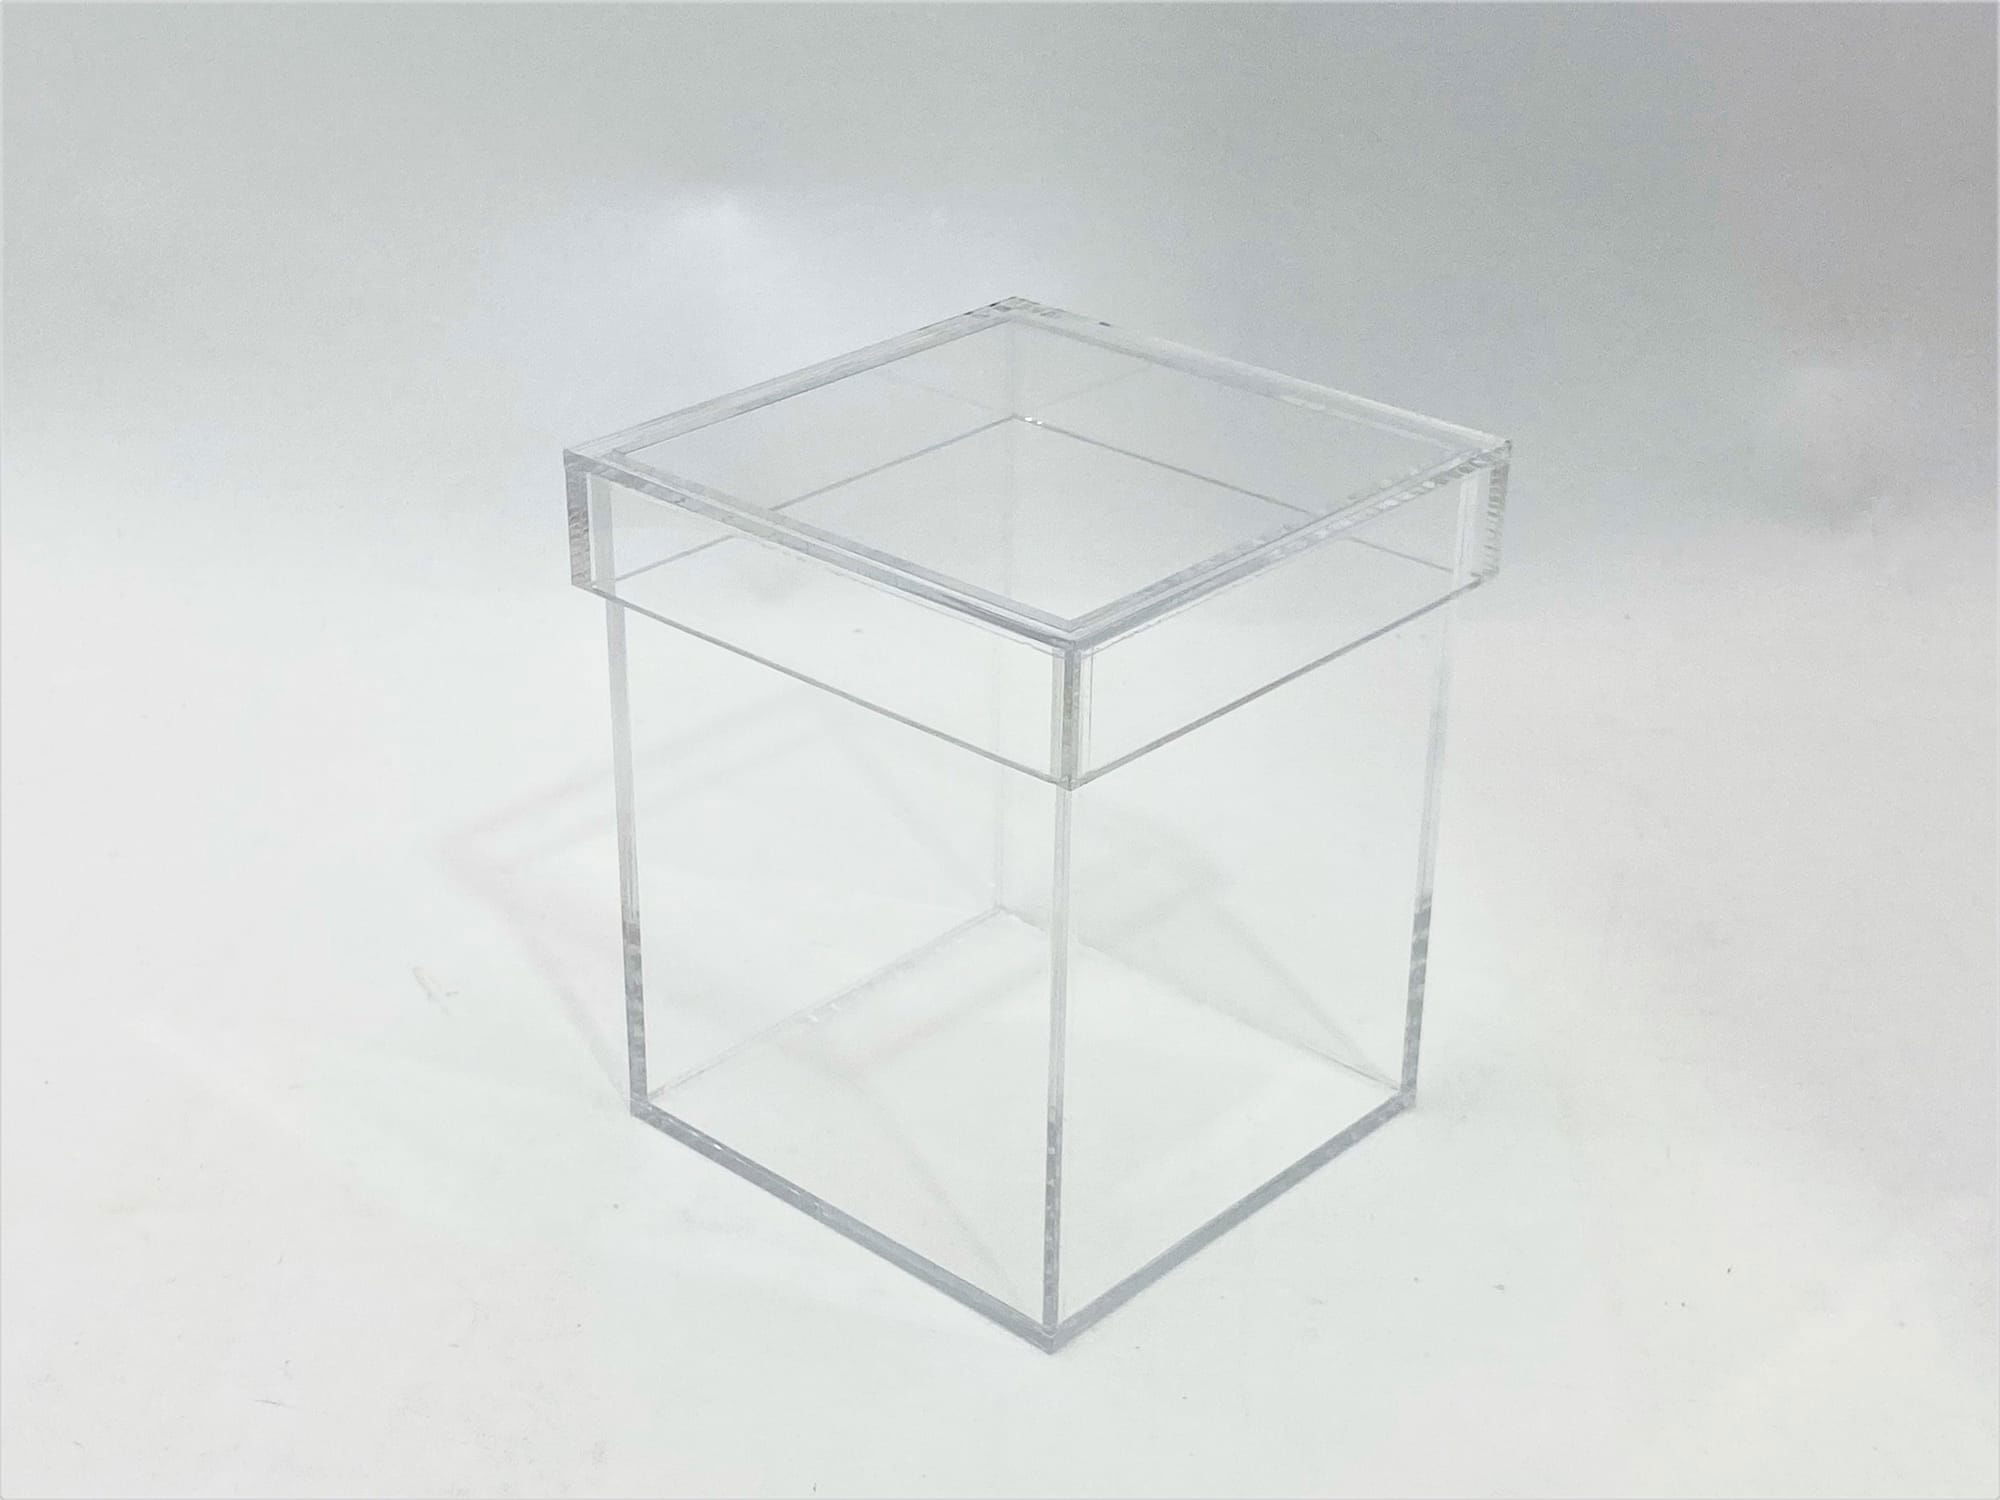 Clear Acrylic Shoe Lid Box - 2 Displays in 1!